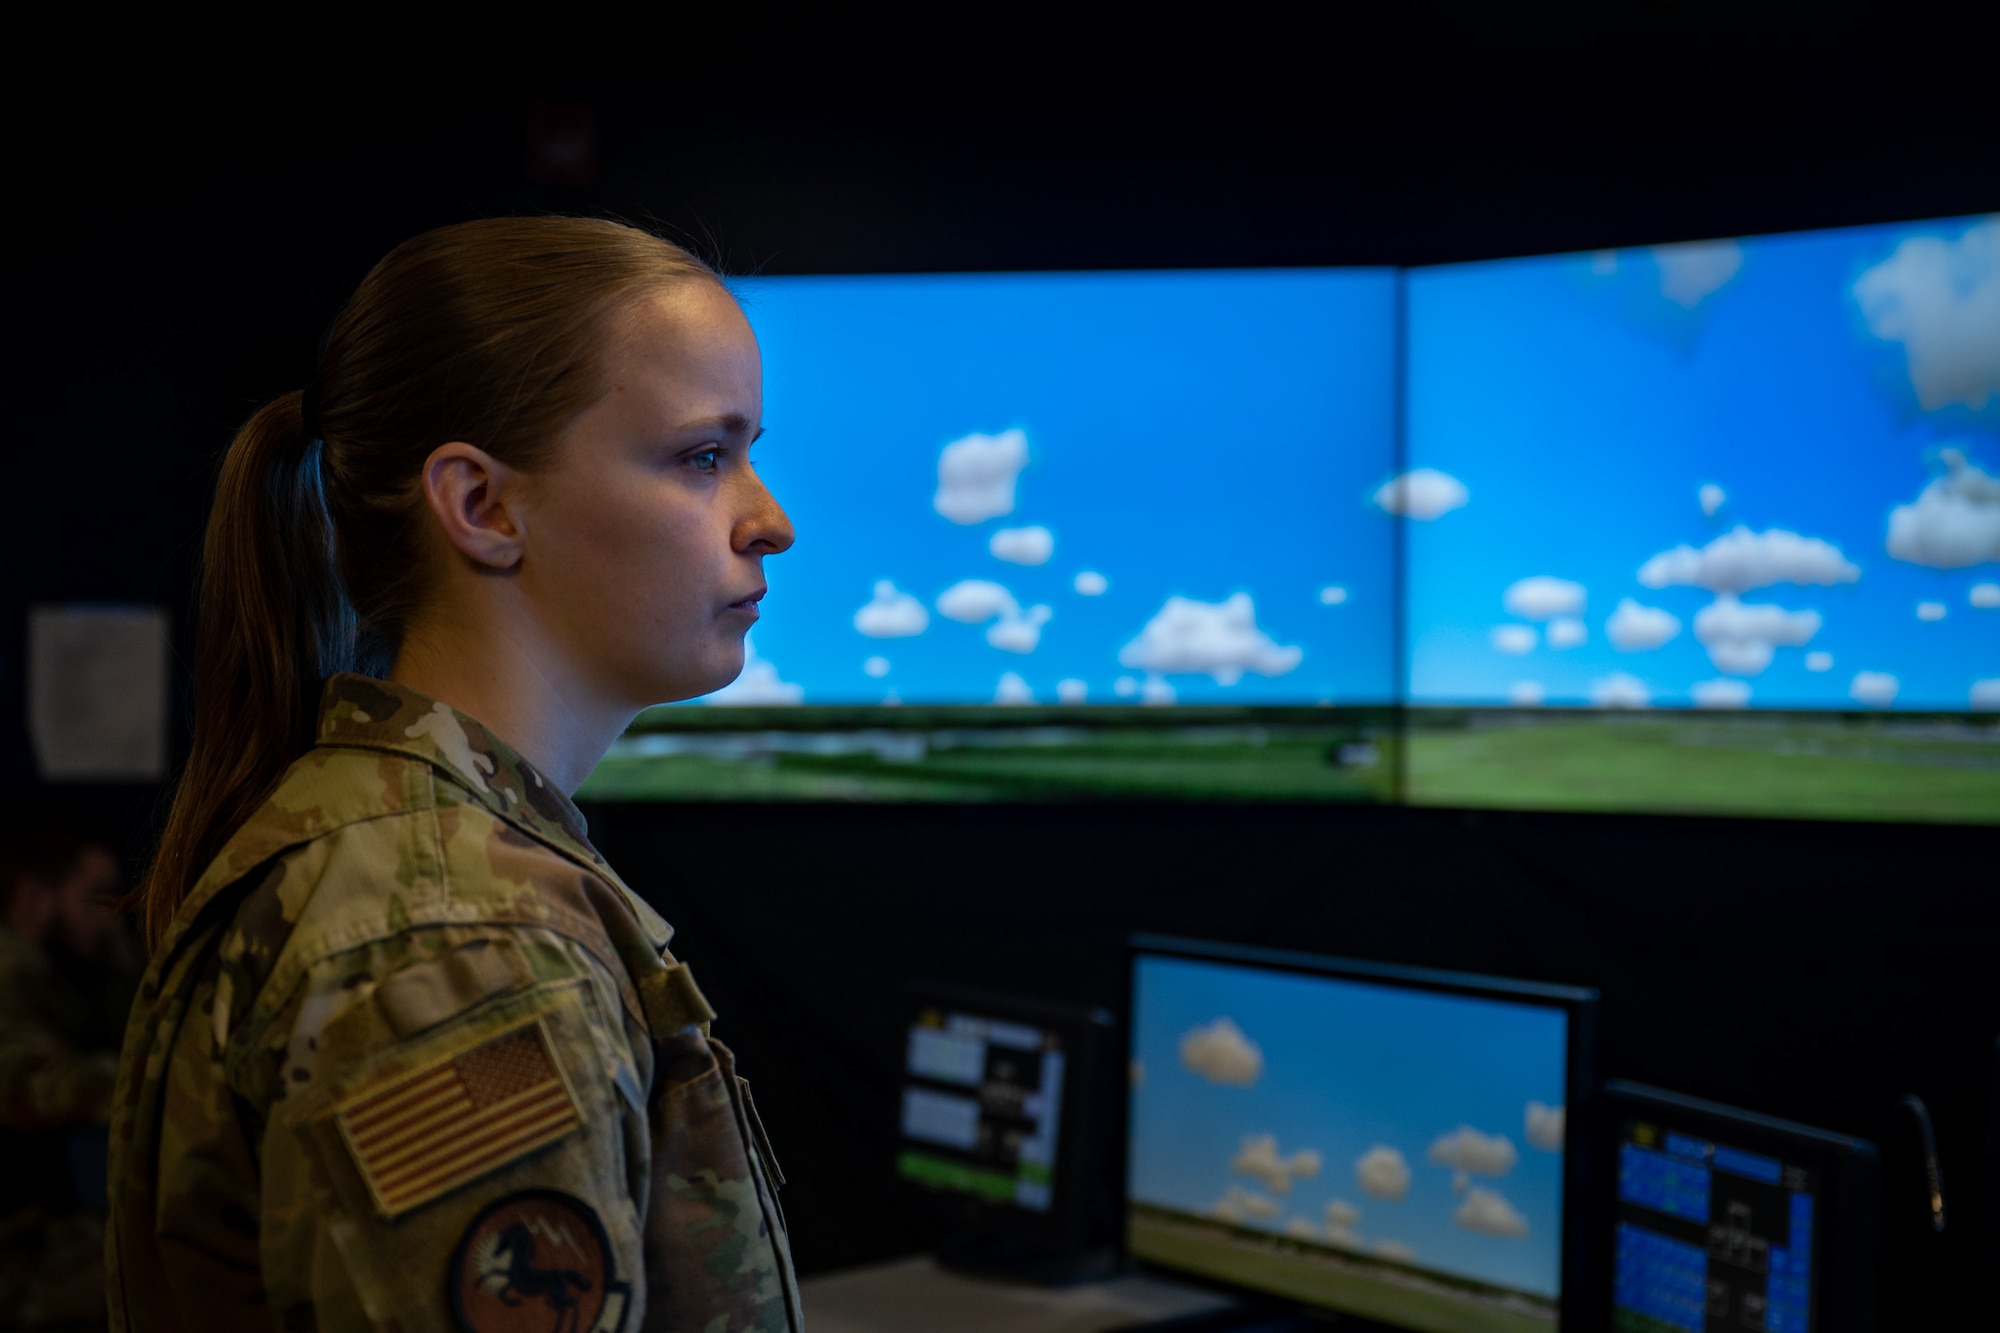 Female airman looks to the right in front of bright screen showing blue sky